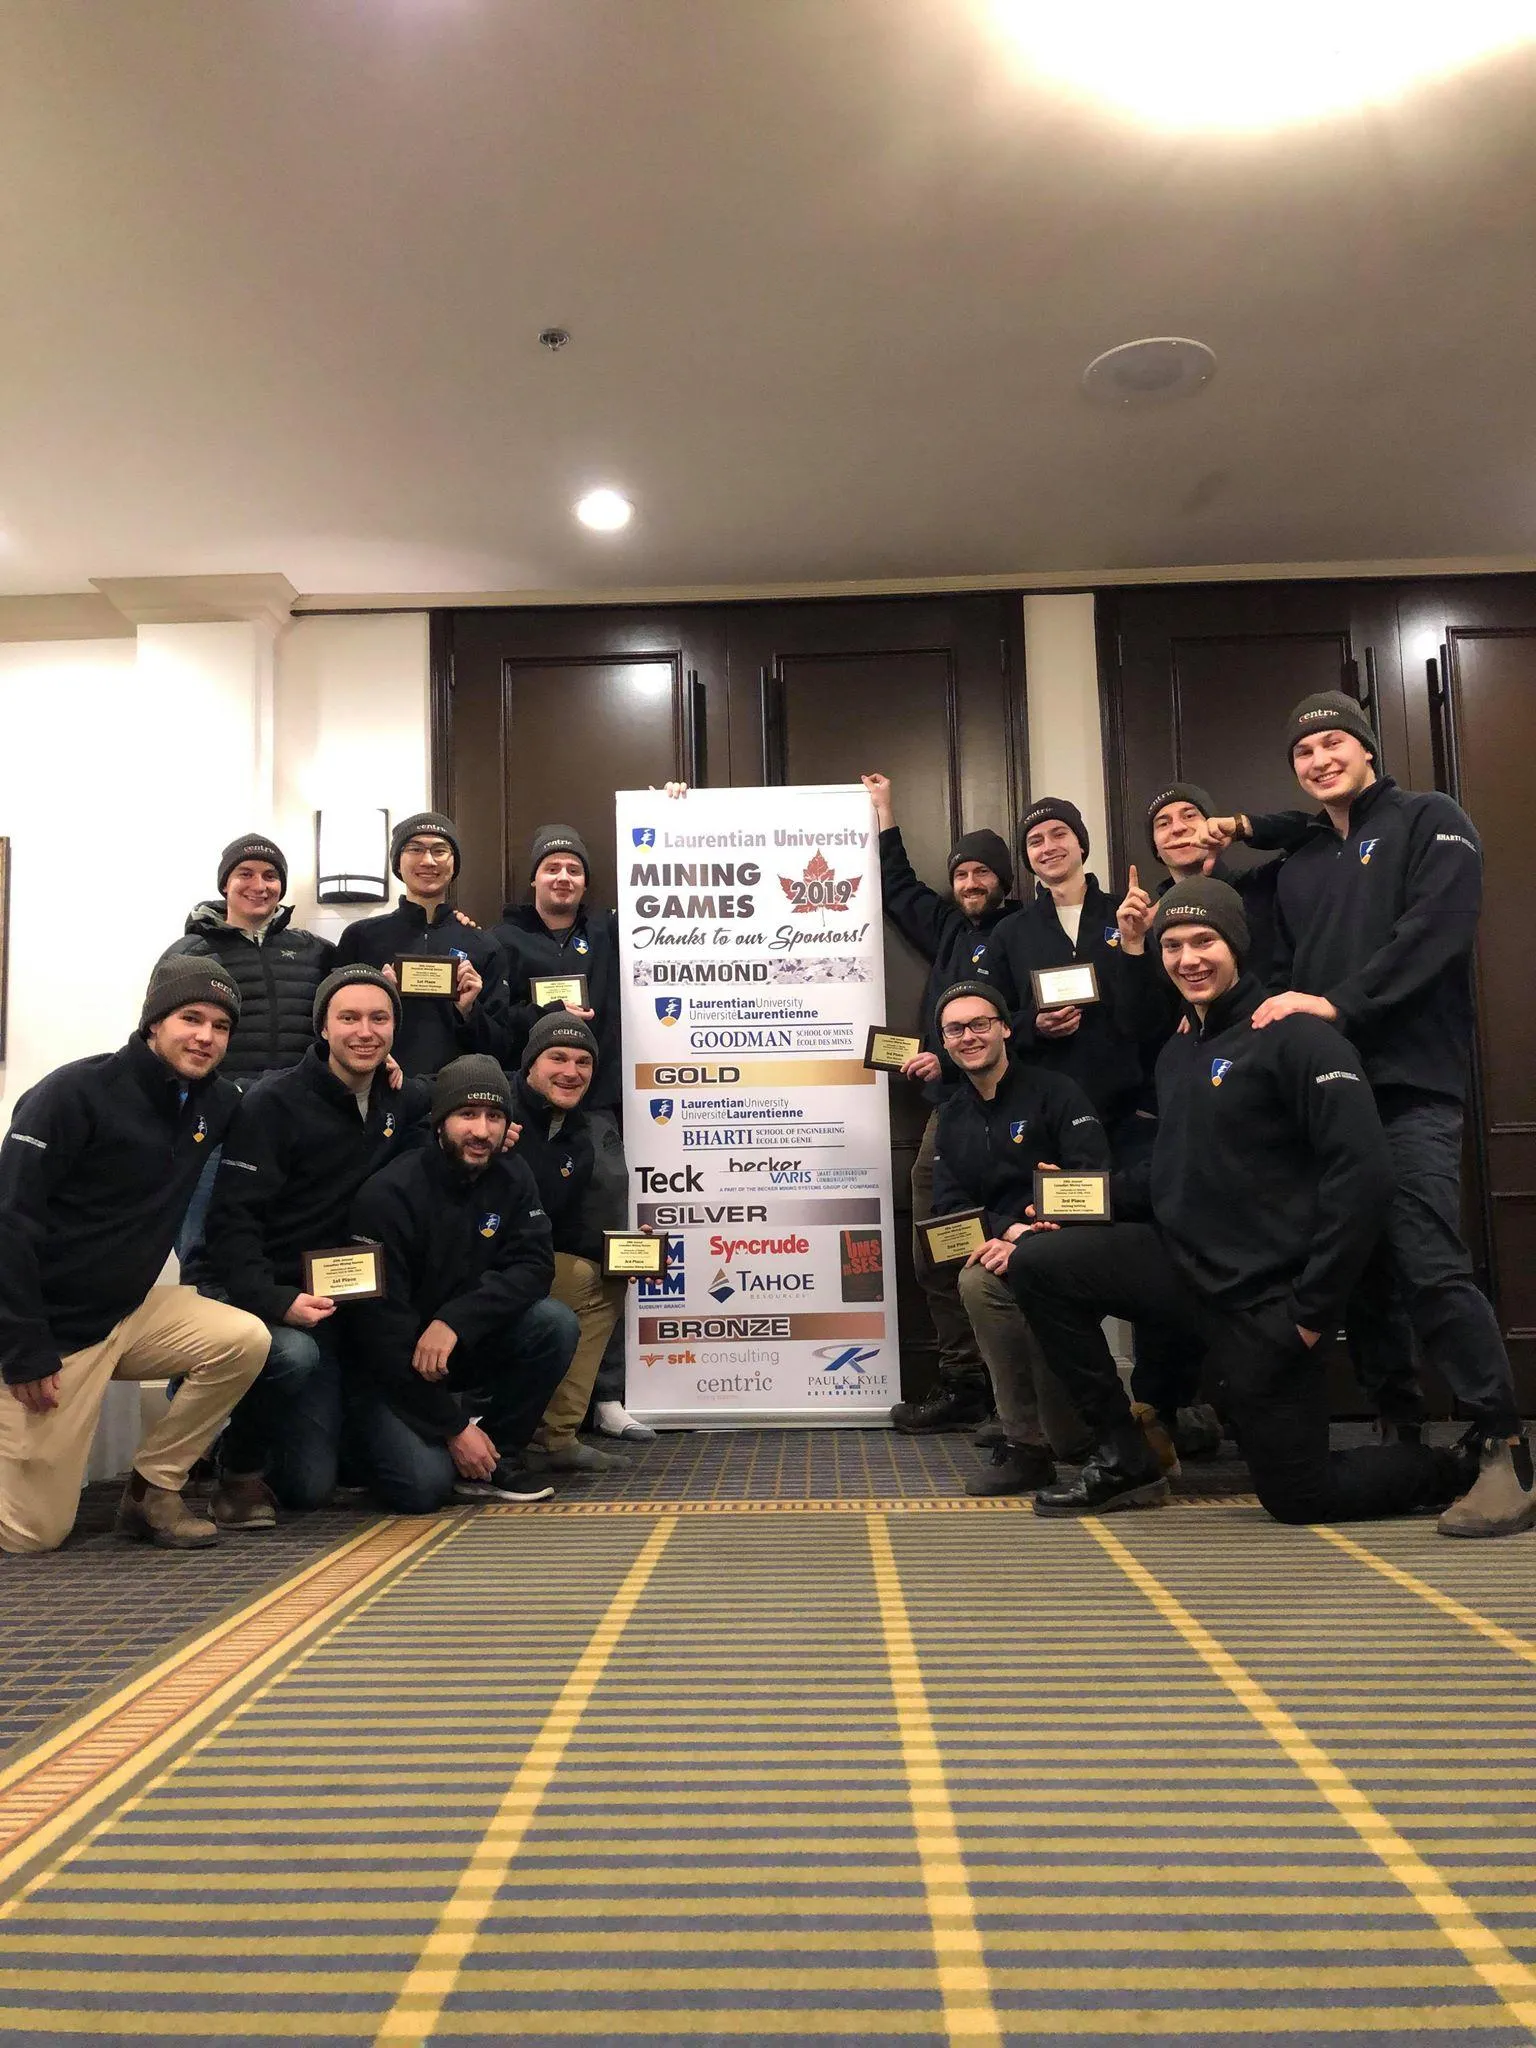 Team picture with event banner and logo